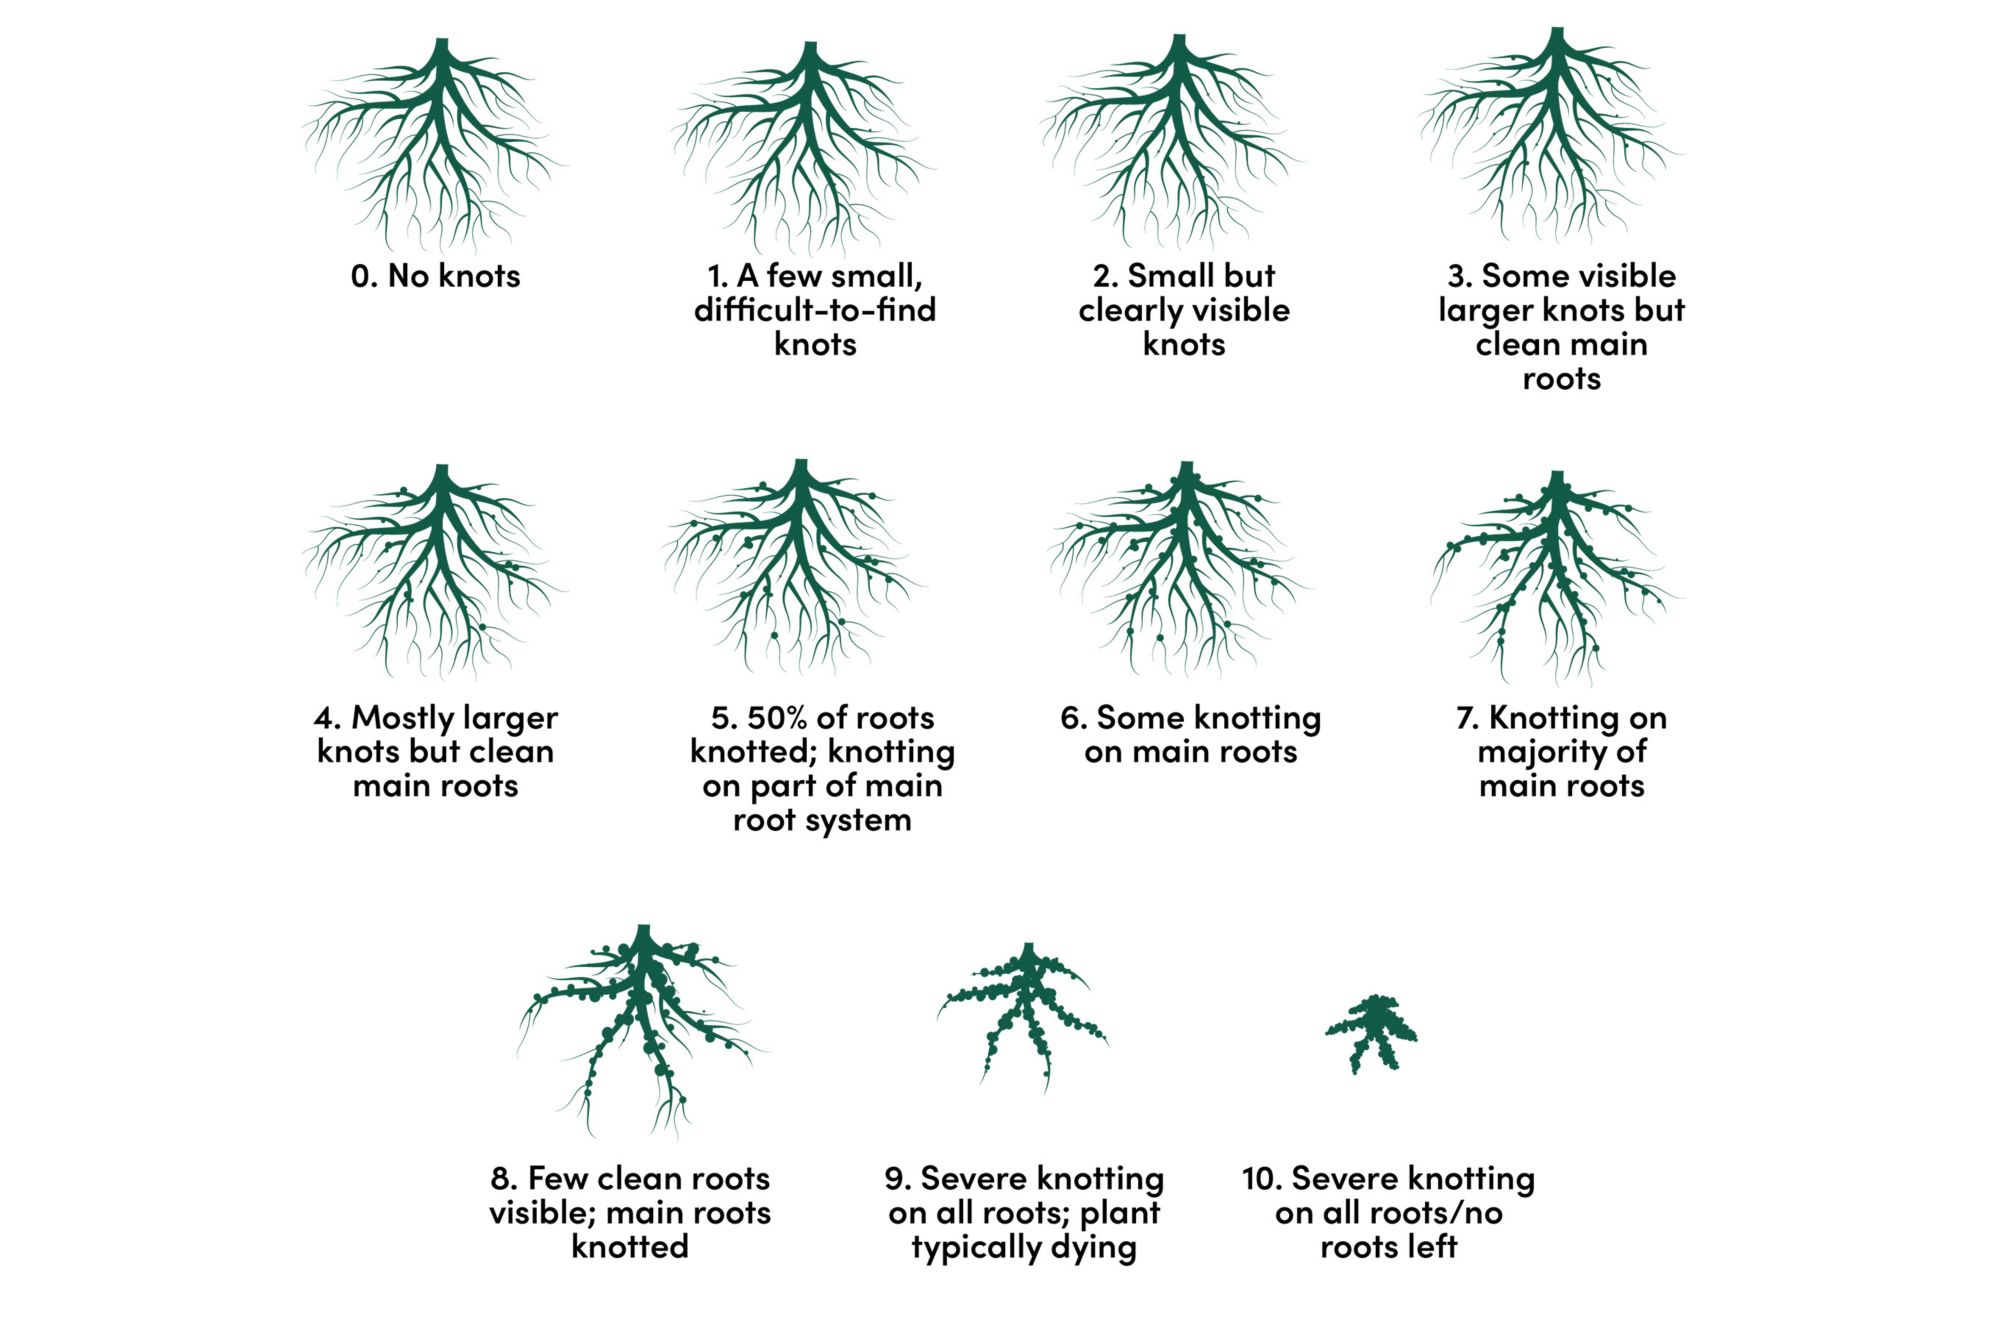 The diagram shows roots at different stages of knots on the Zeck scale, from healthy roots to complete root loss 